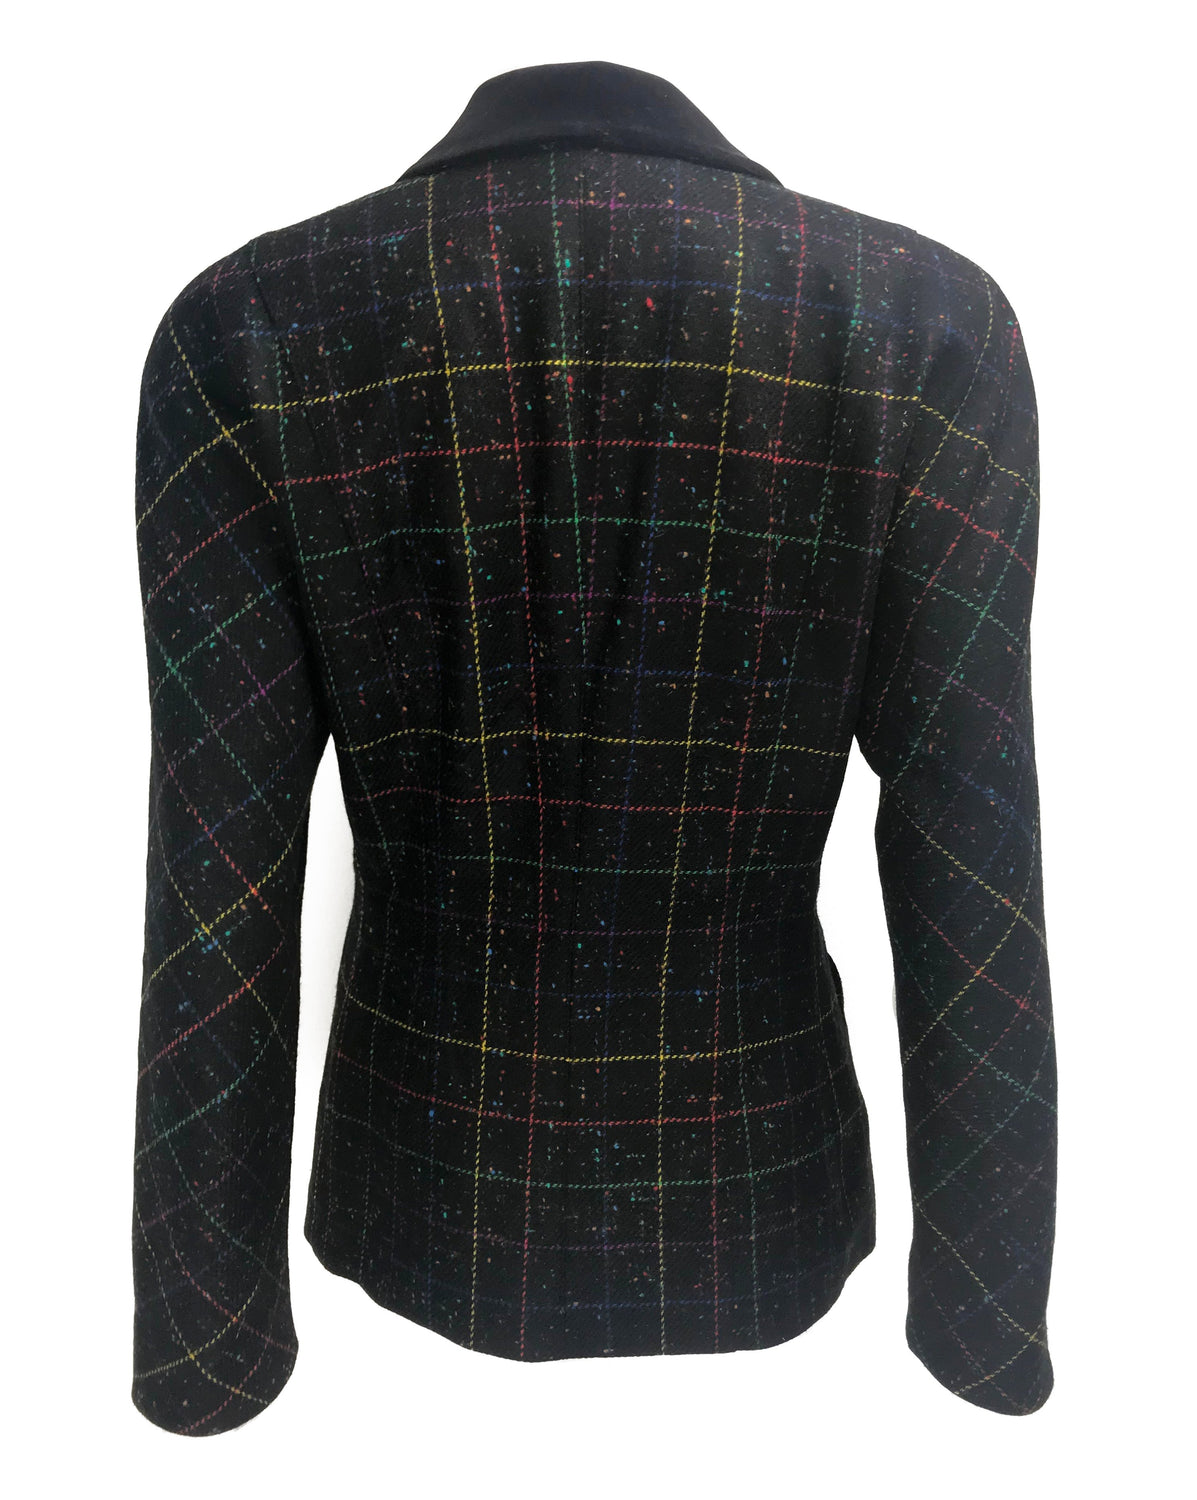 FRUIT Vintage Escada 1980s traditional style wool tweed blazer with standout rainbow checks. Features two front pockets and a classic velvet contrast collar.